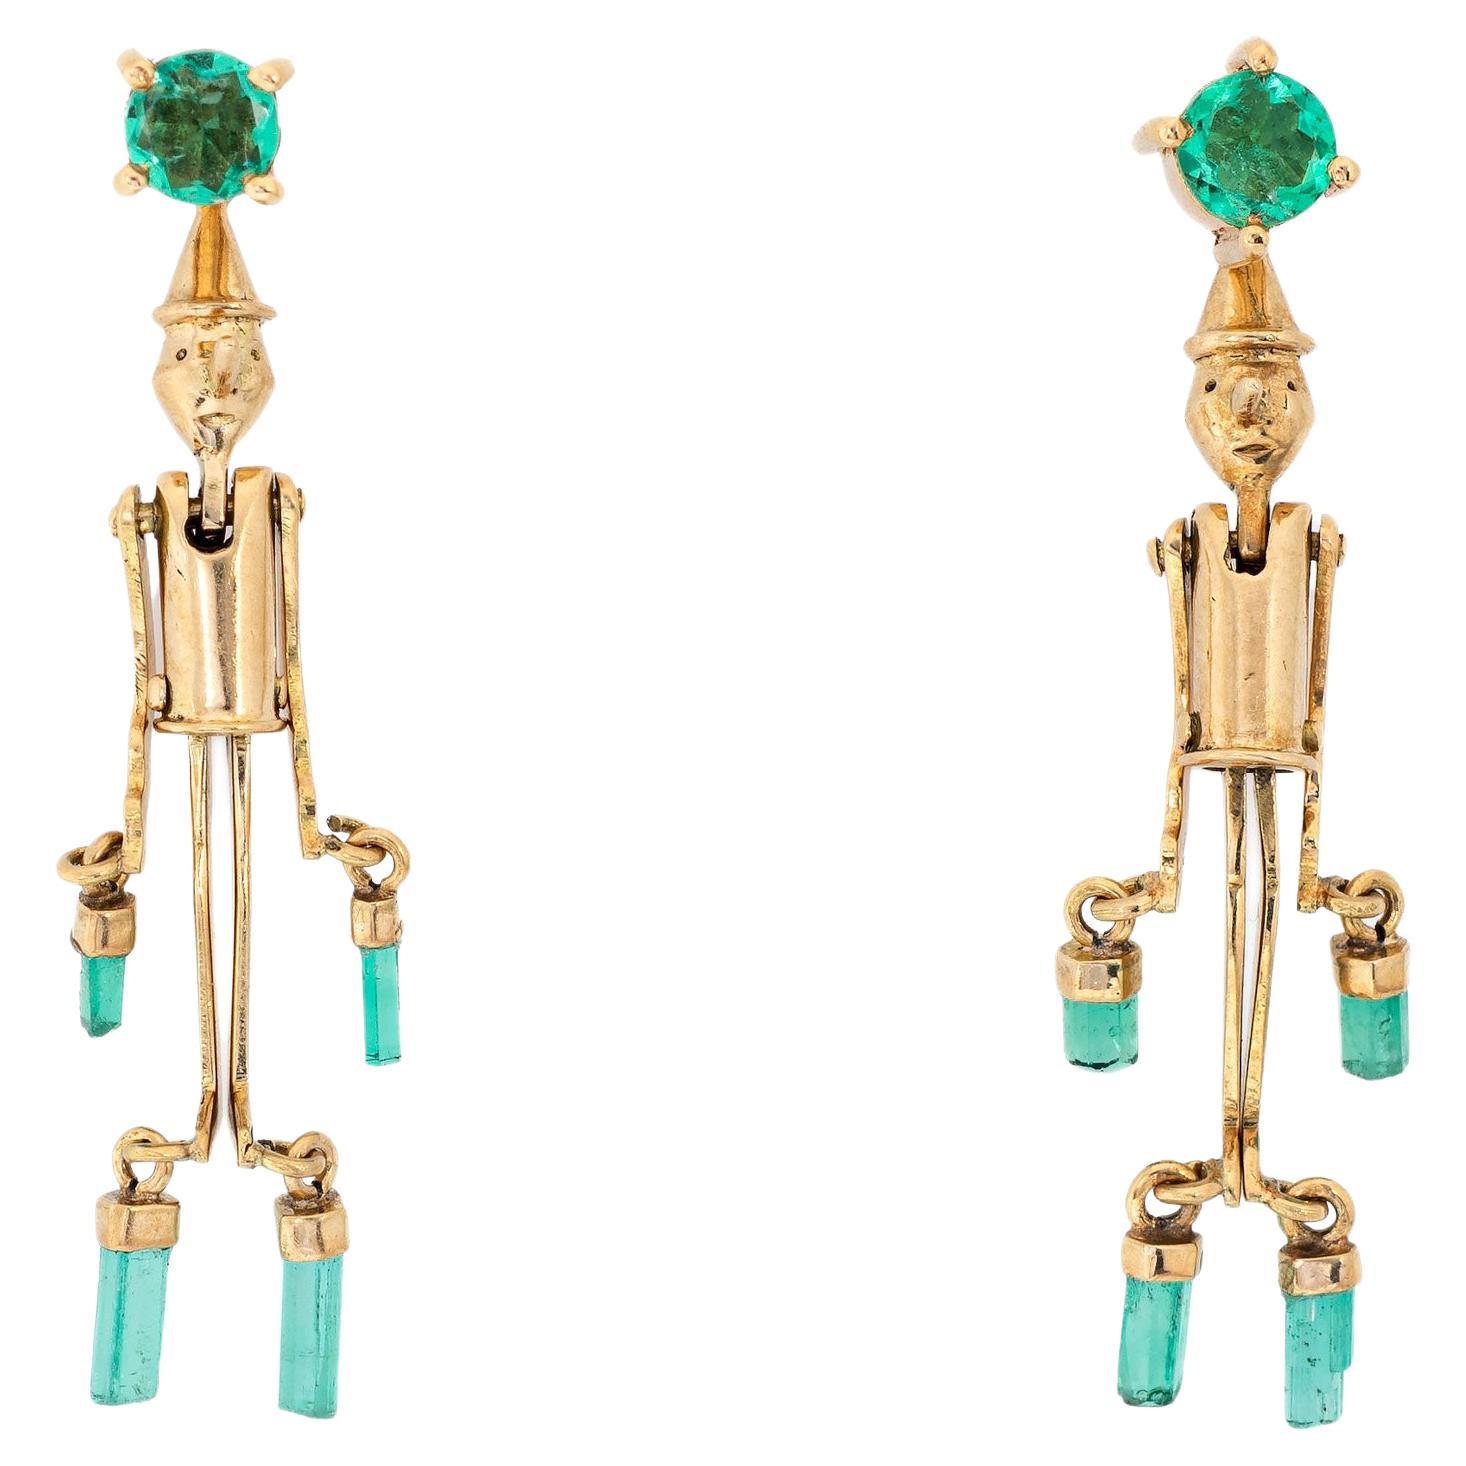 Pinocchio Emerald Earrings Articulated 18k Yellow Gold Vintage Jewelry